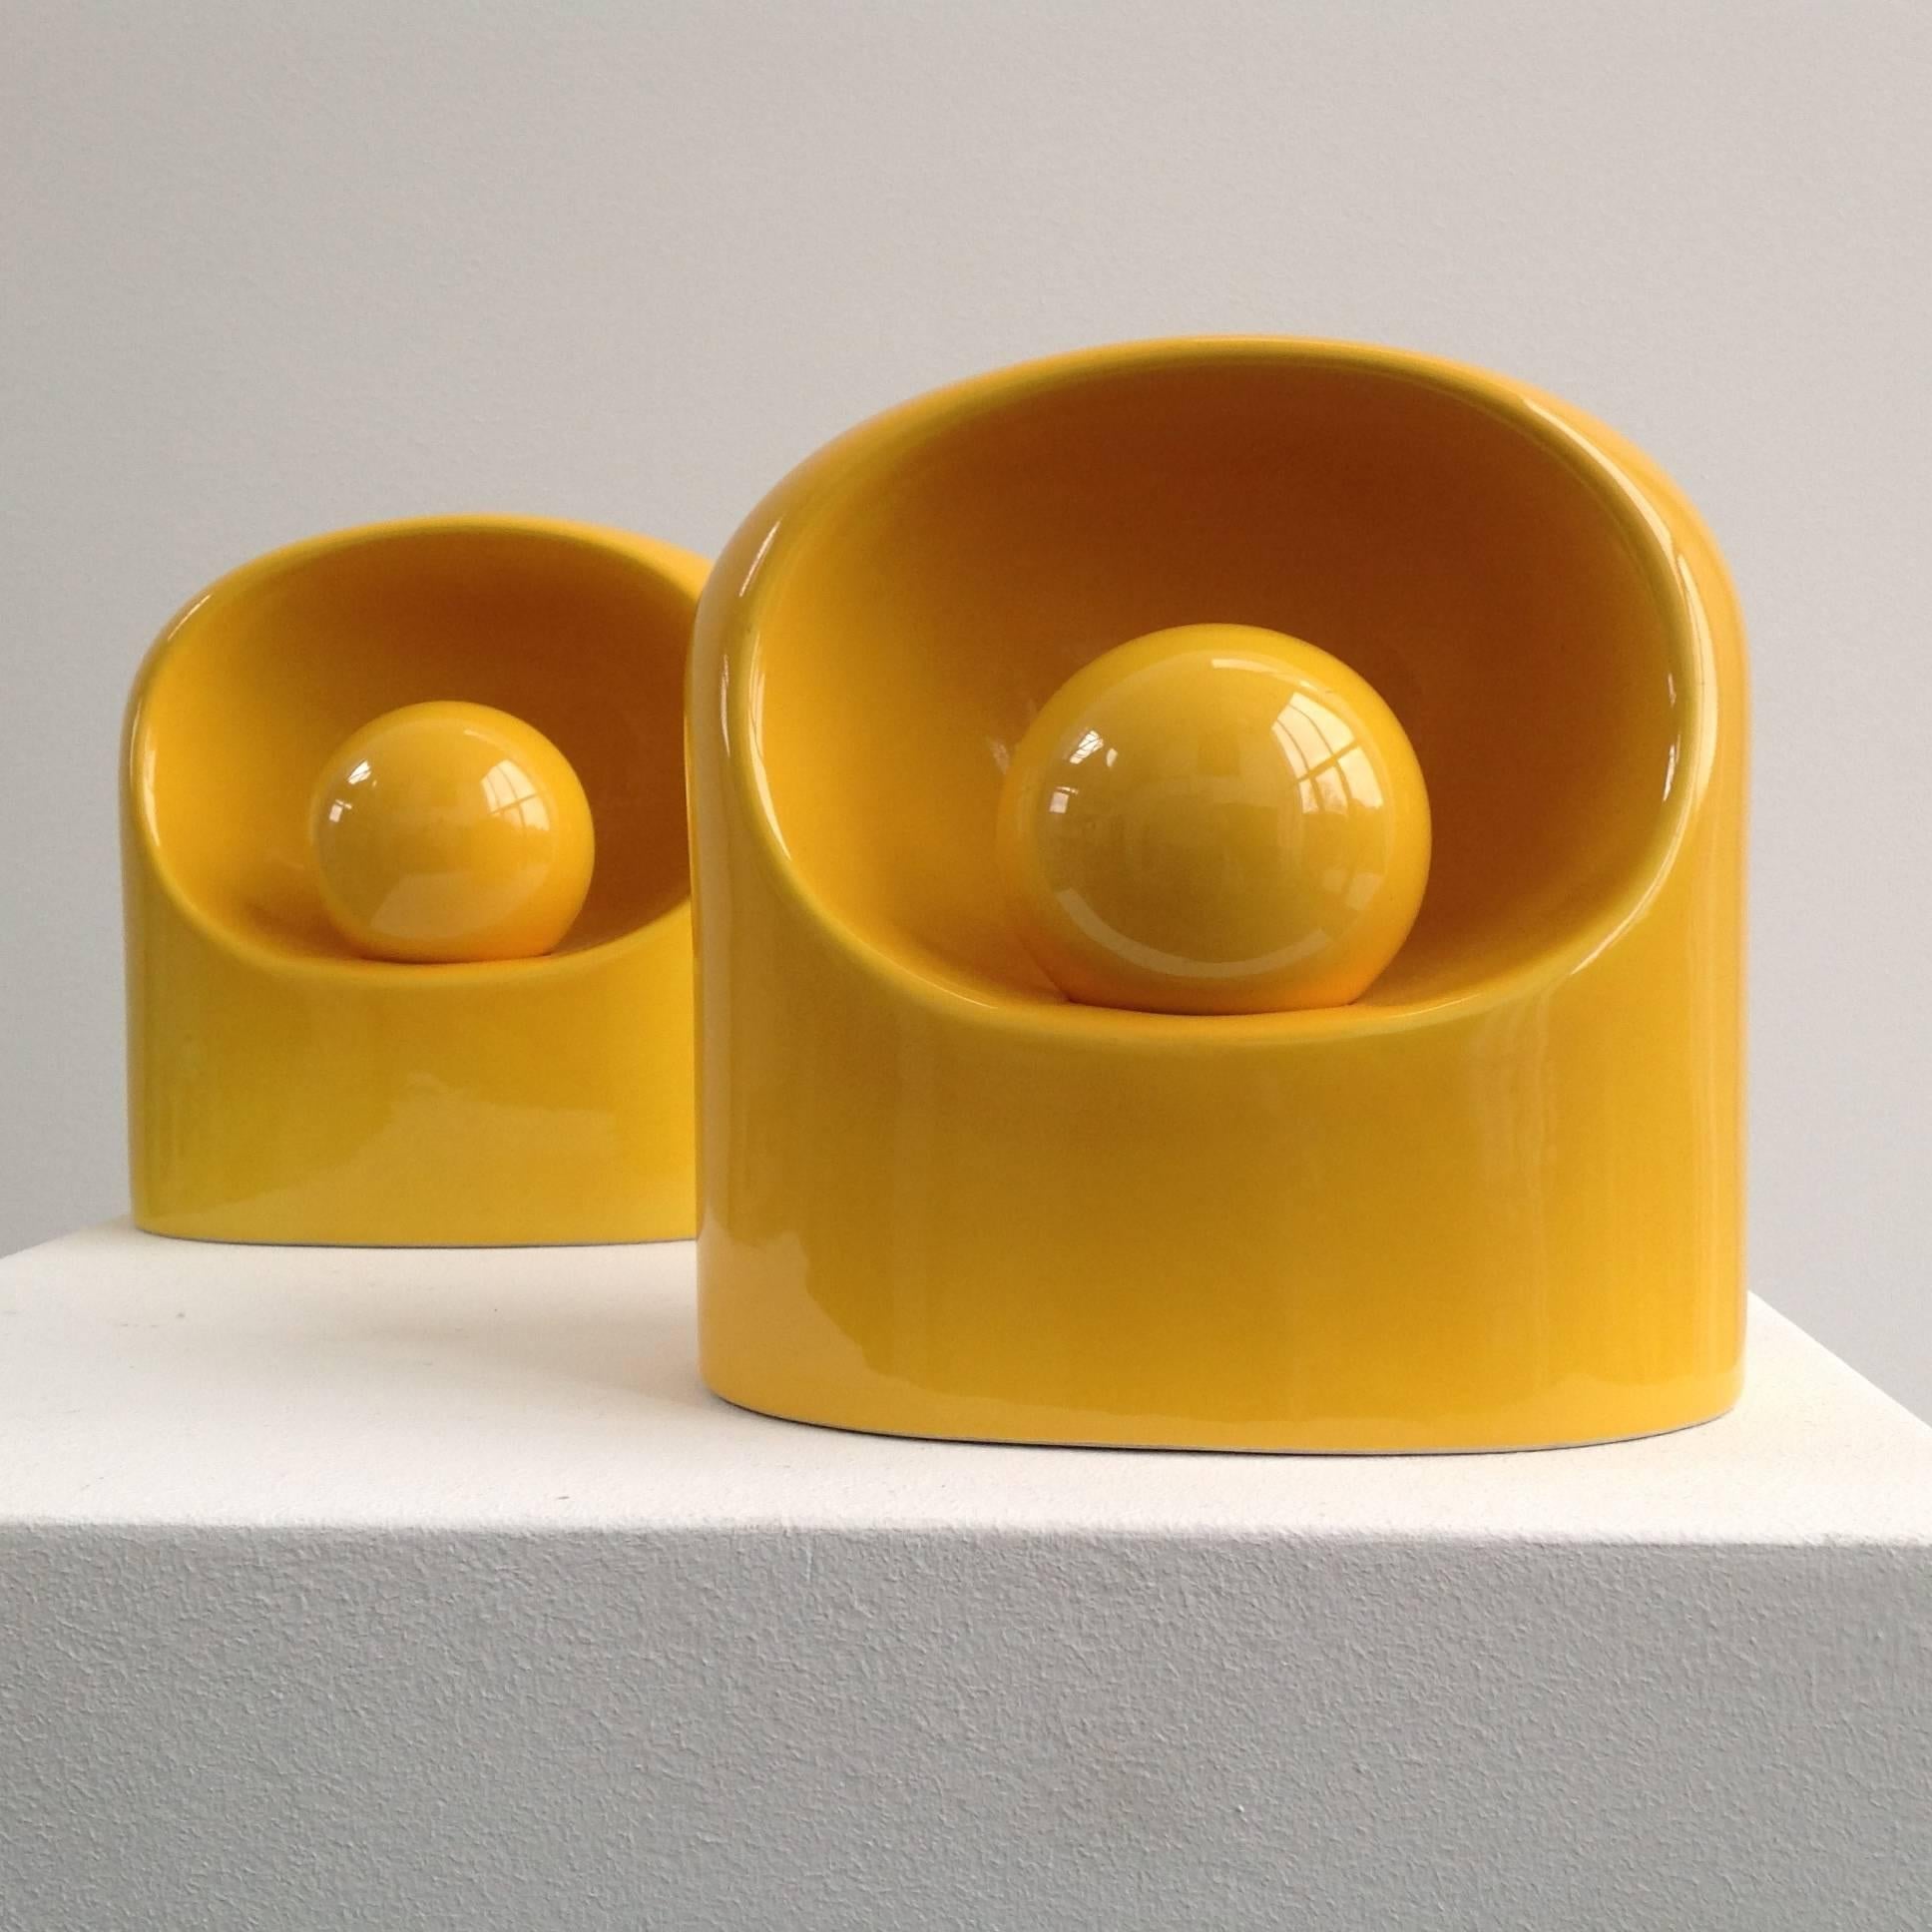 Very rare in yellow, pair of same ceramic lamps by Marcello Cuneo for Gabianelli.
The Ceramic lamps where designed in the 60s by Italian Architect Marcello Cuneo for Gabianelli (Italy).
Desk/table lamps are in excellent condition!

More pictures